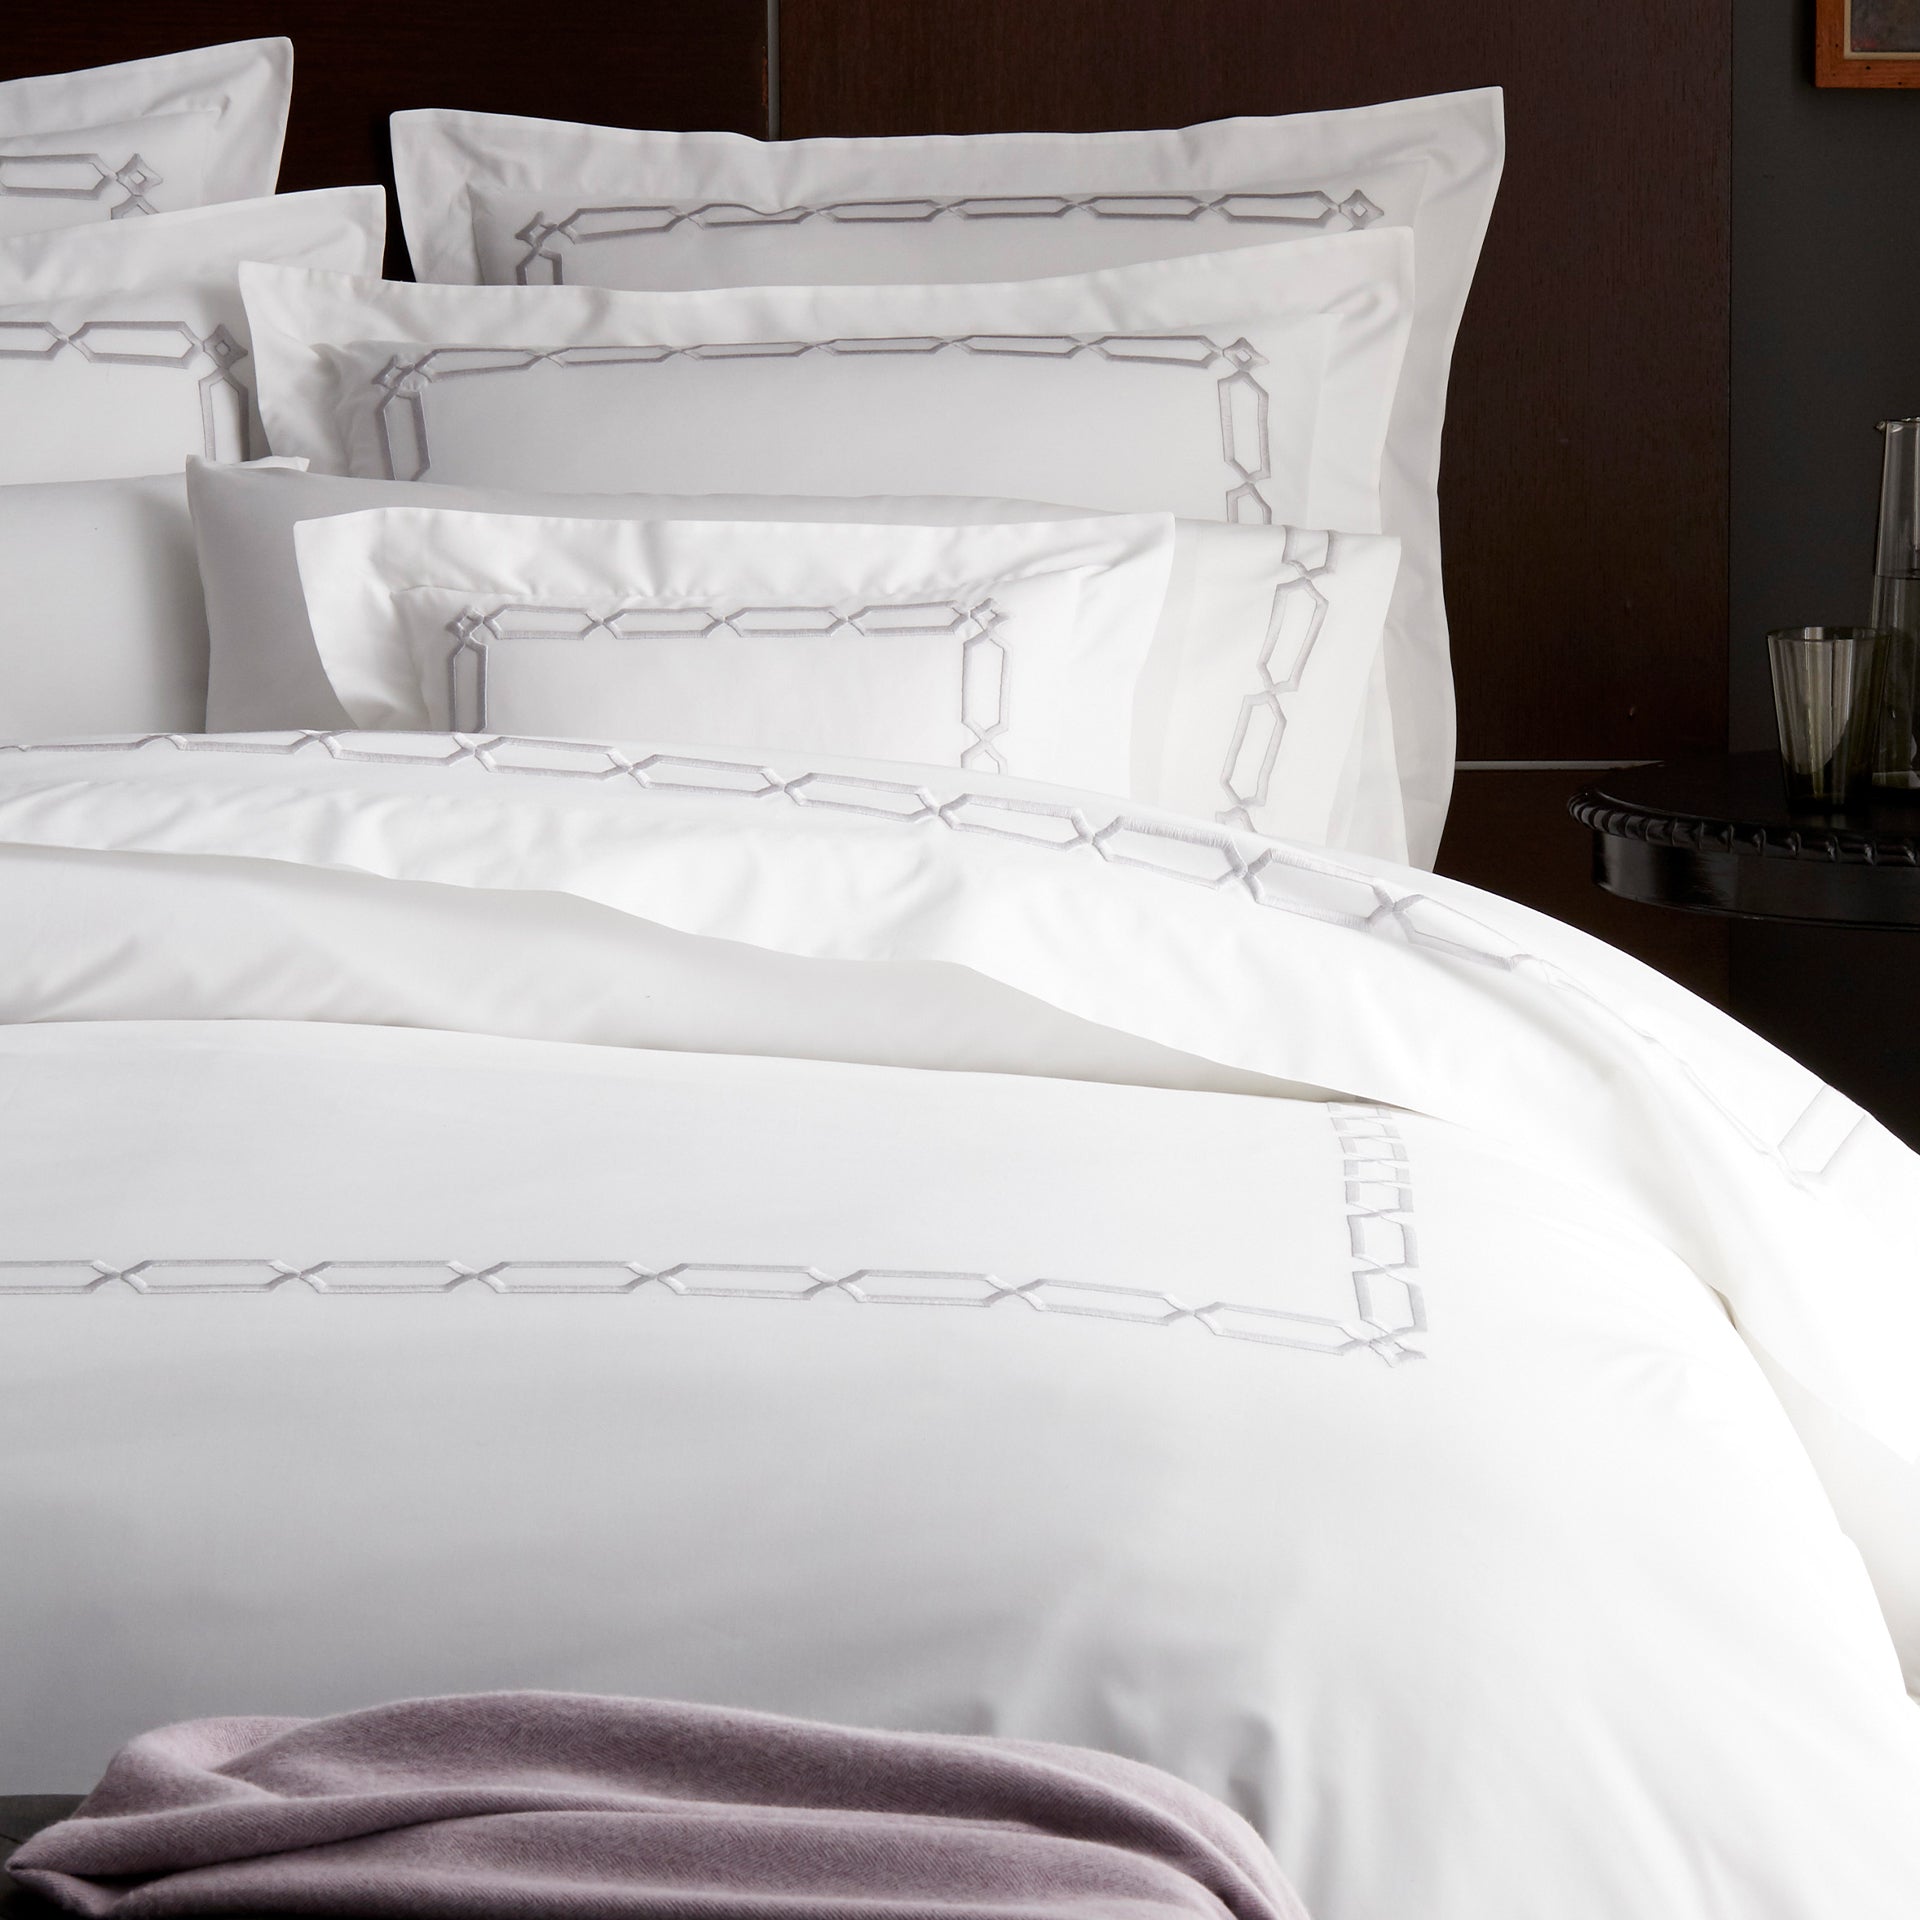 arezzo pillowcase shown on bed accompanied with standard and euro shams. 400 thread count, Egyptian cotton pillowcase, #color_shadow & white